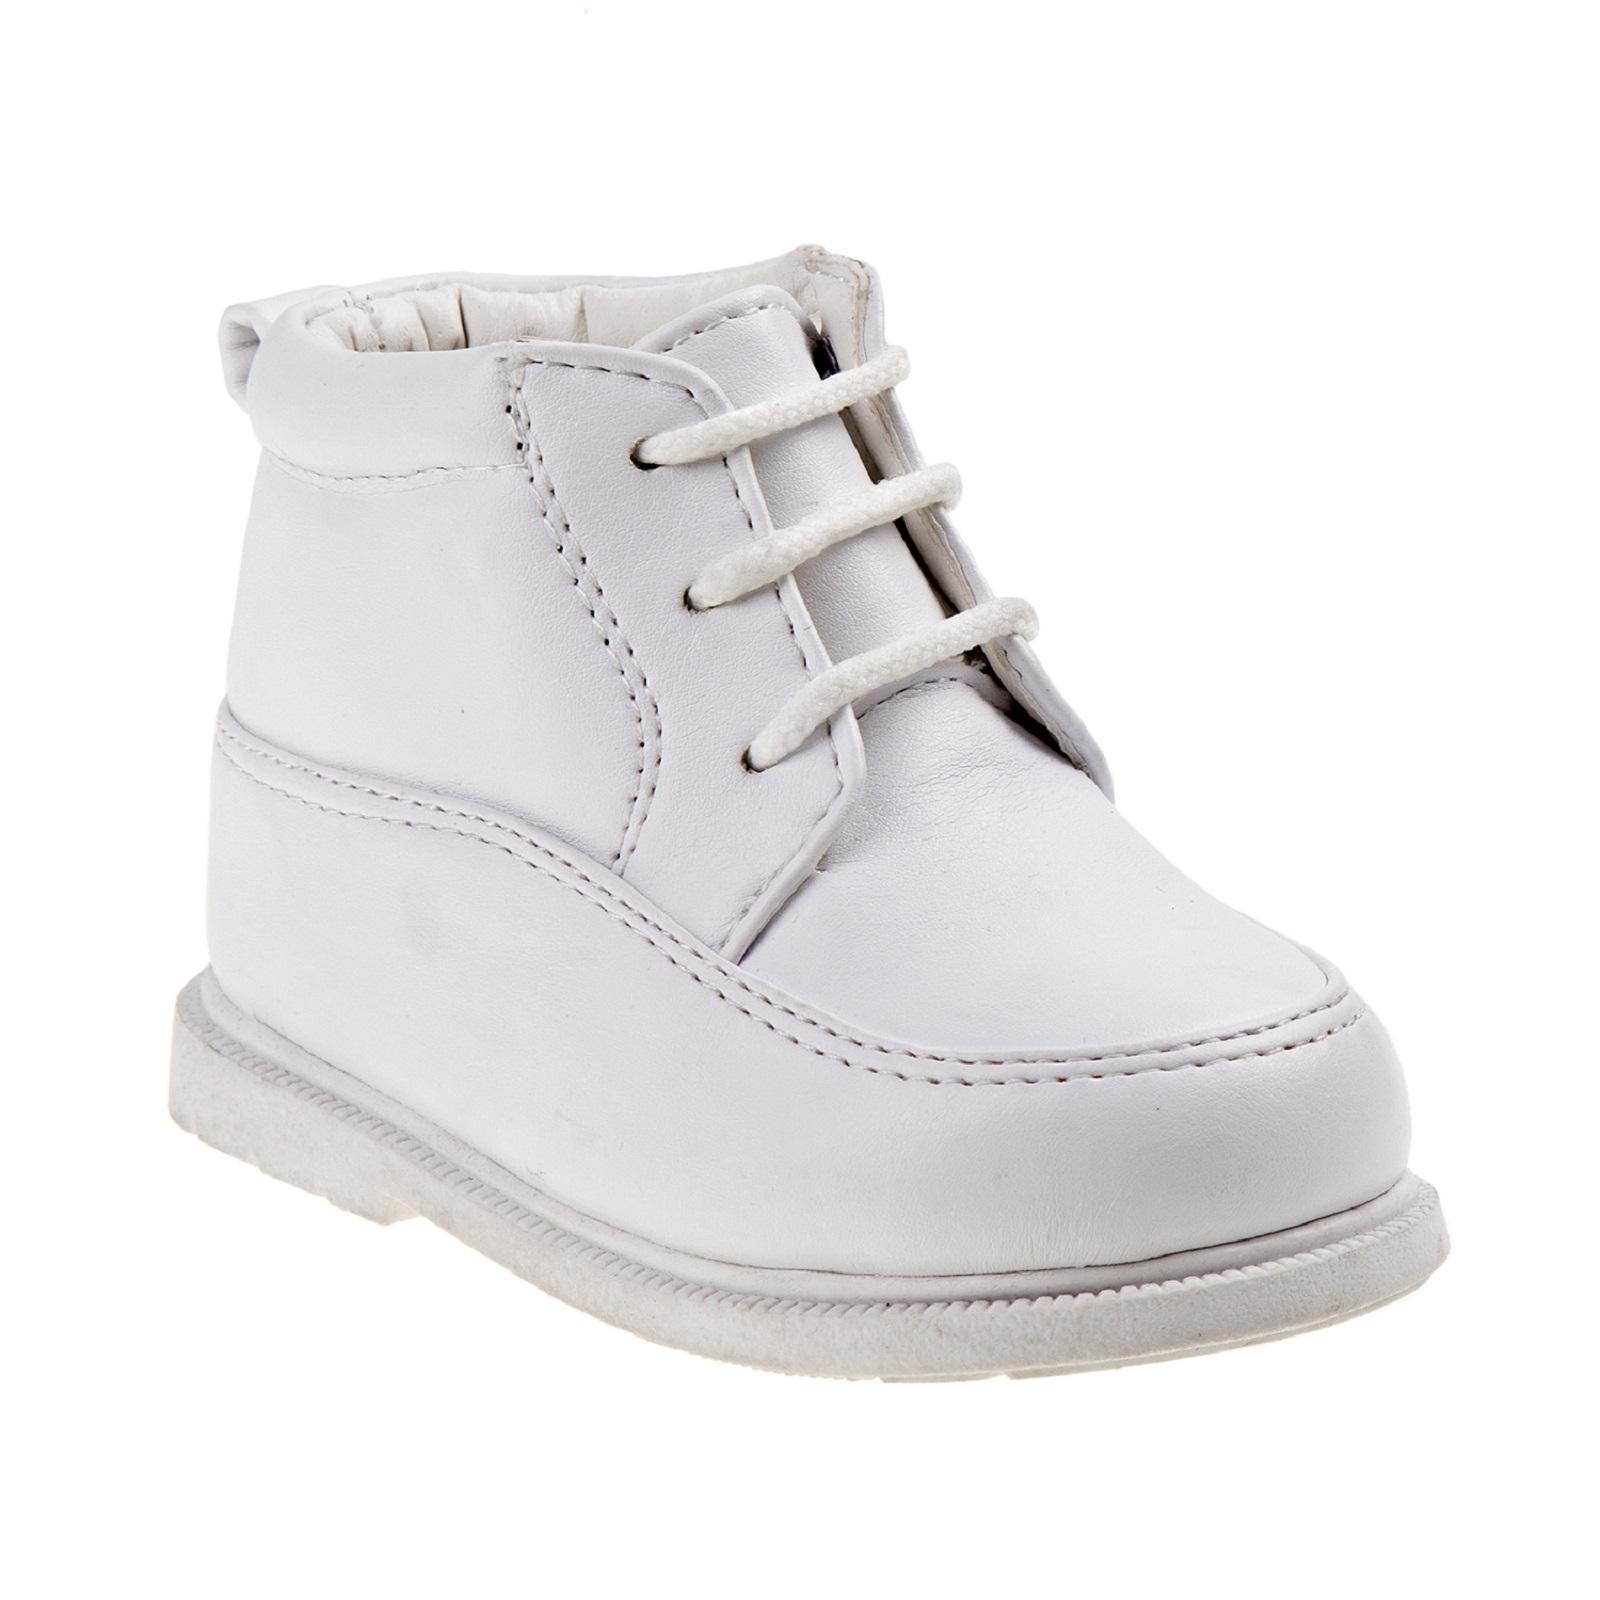 Josmo Baby Boys' White Lace-Up Boot